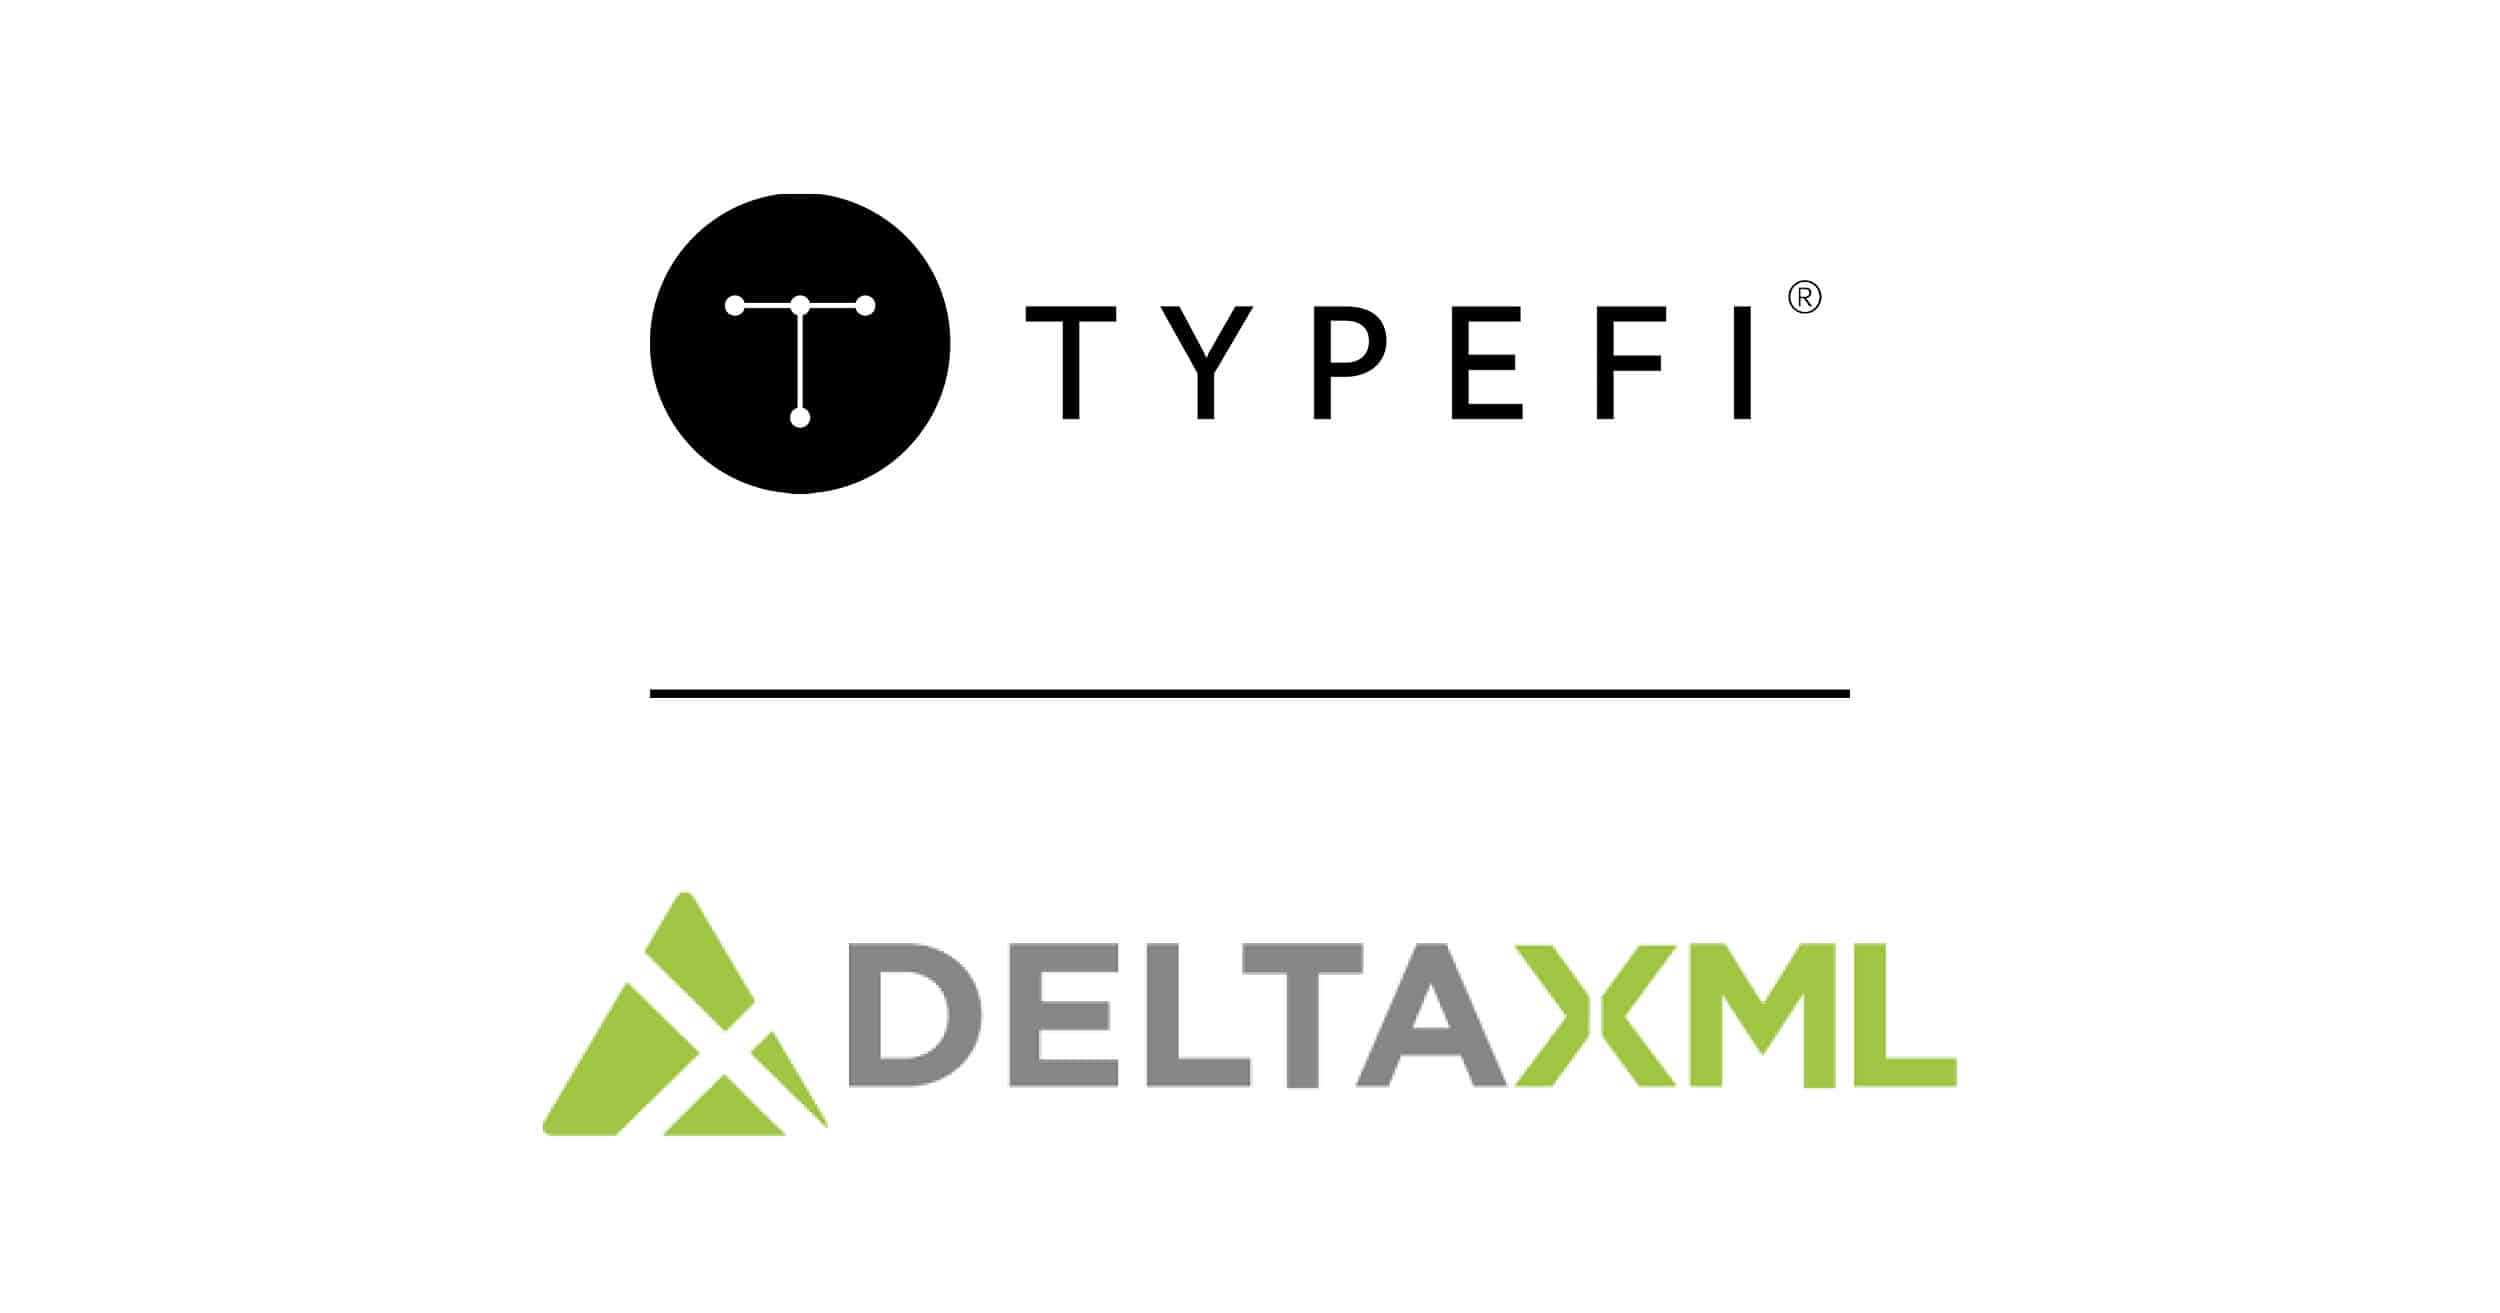 Graphic showing logos of Typefi above the logo of DeltaXML